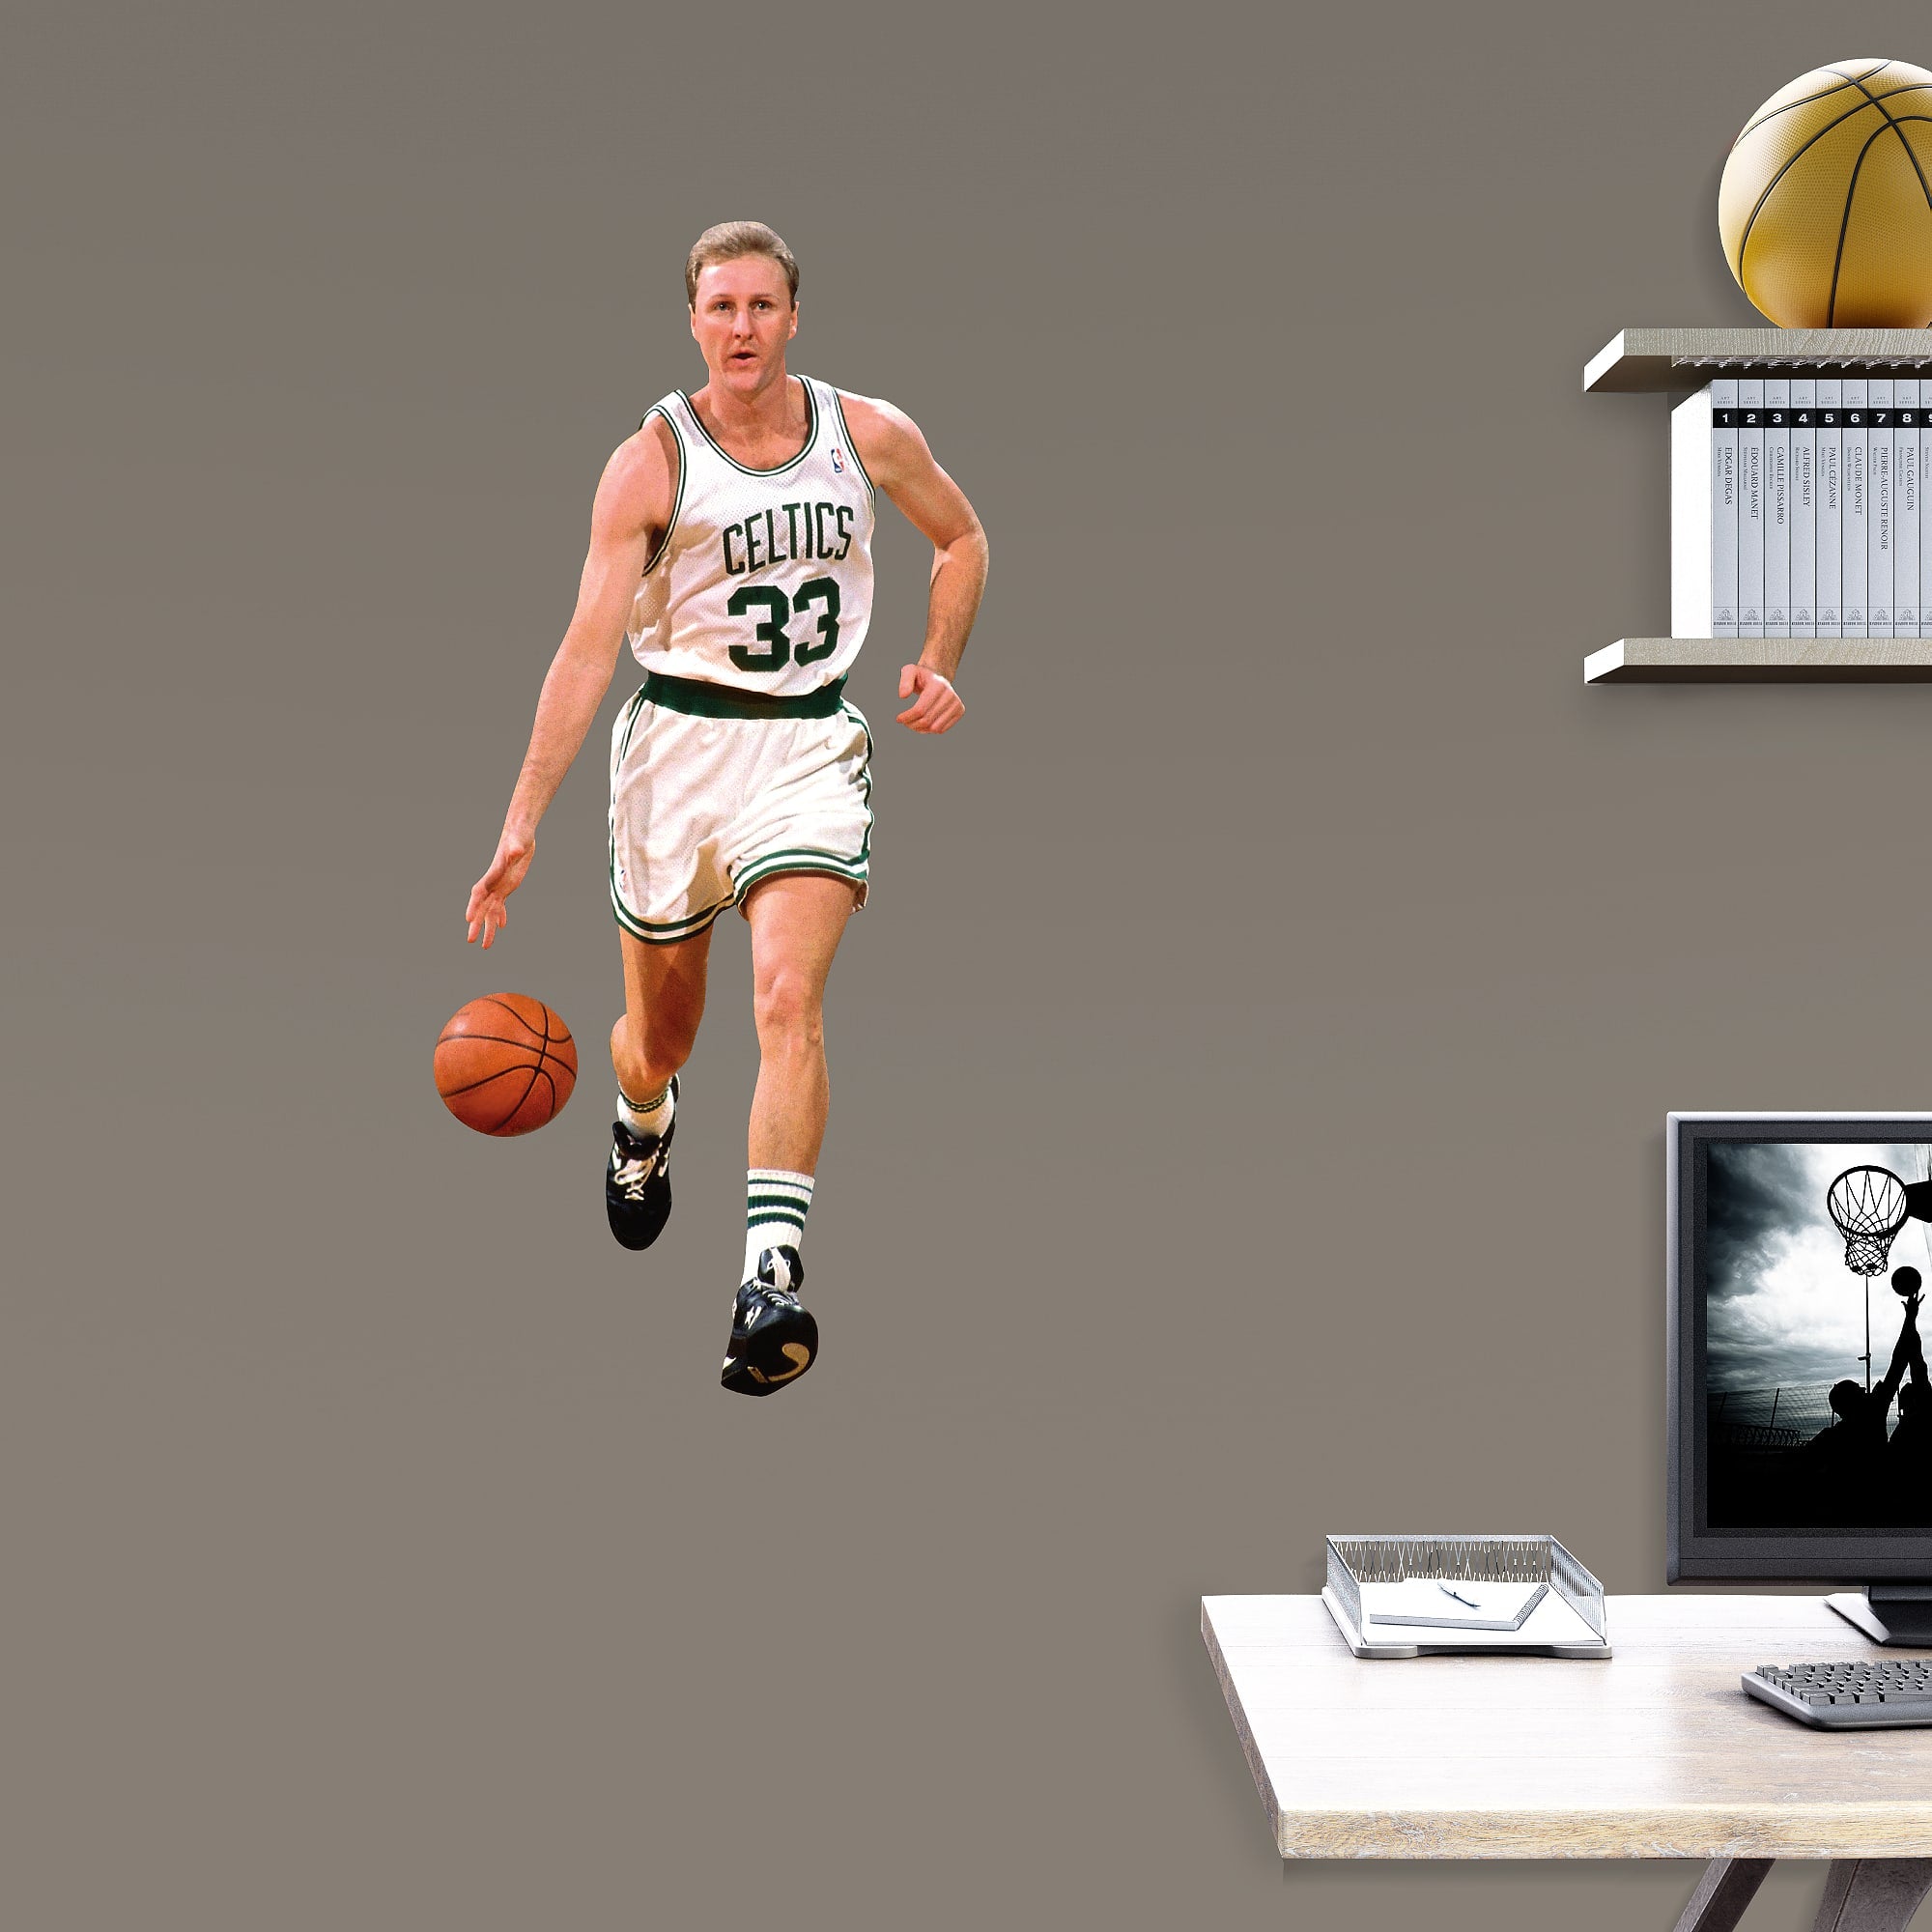 Larry Bird for Boston Celtics - Officially Licensed NBA Removable Wall Decal 15.0"W x 32.0"H by Fathead | Vinyl